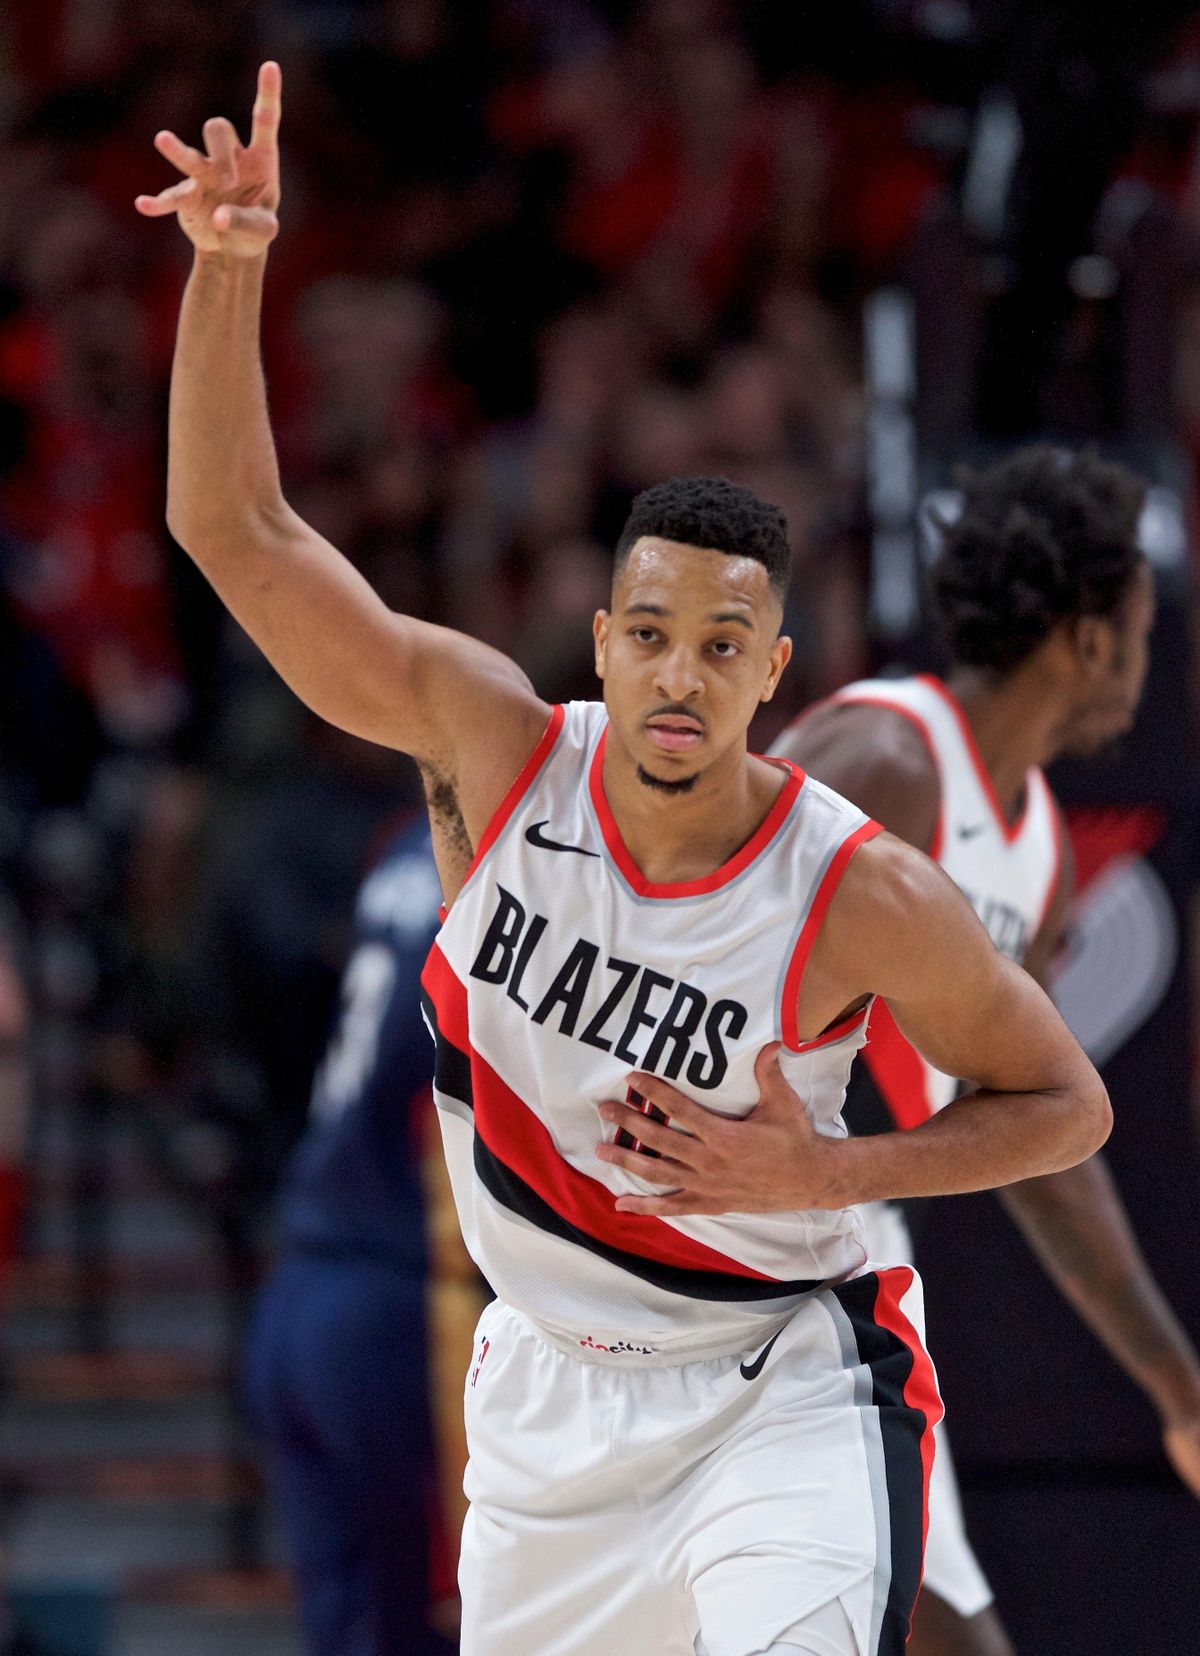 Portland Trail Blazers guard CJ McCollum gestures after hitting a 3-point basket against the New Orleans Pelicans during the first half of Game 2 of an NBA basketball first-round playoff series Tuesday, April 17, 2018, in Portland, Ore. (Craig Mitchelldyer / Associated Press)